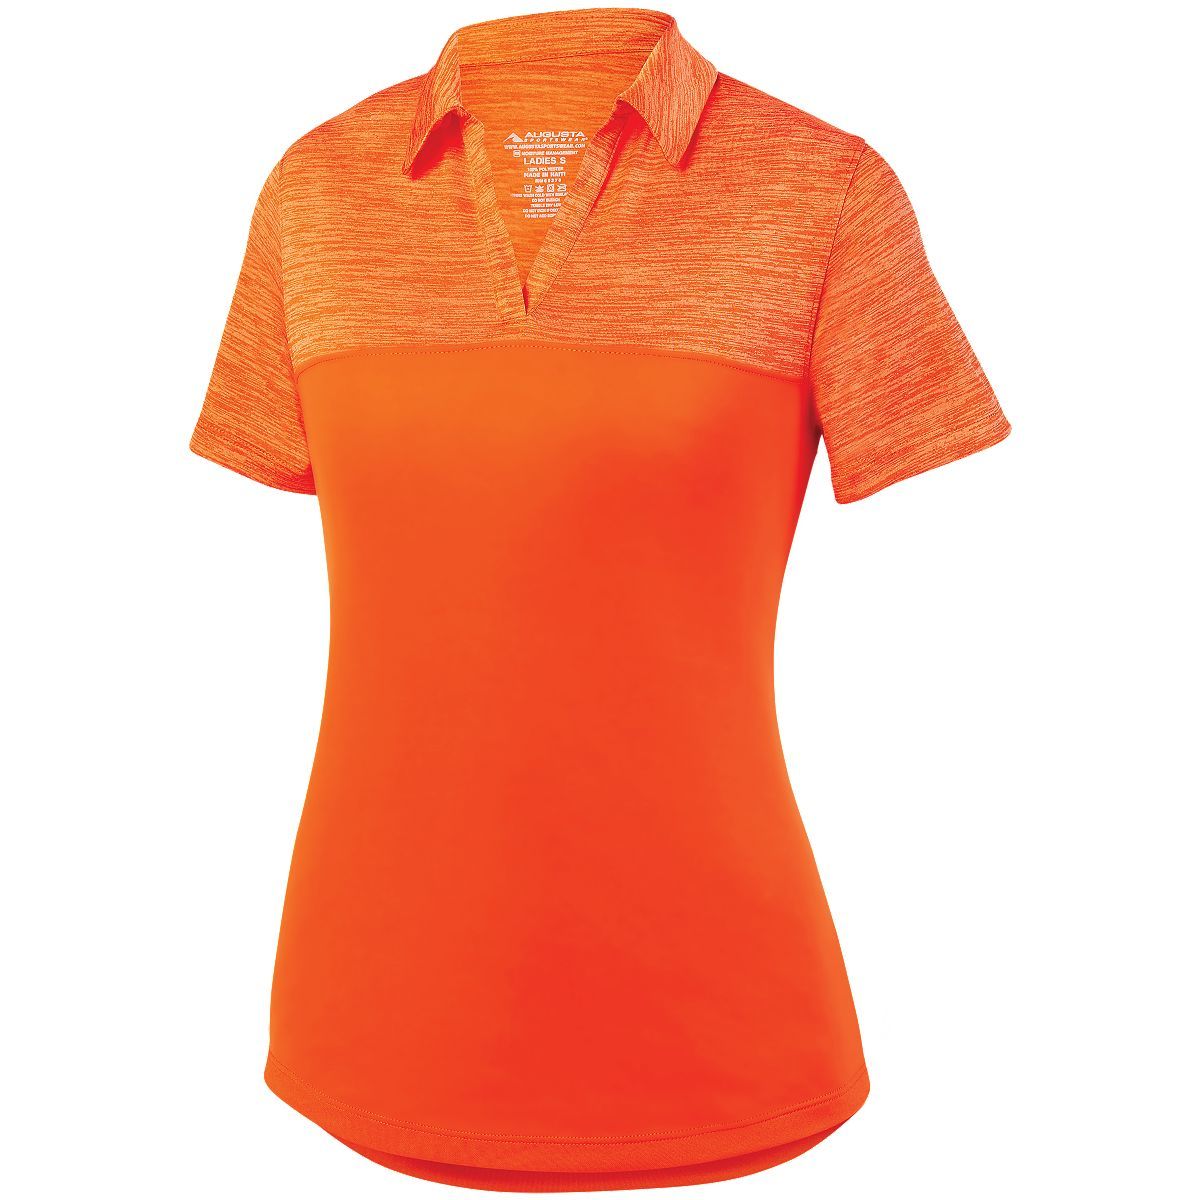 Augusta Sportswear Ladies Shadow Tonal Heather Polo in Orange  -Part of the Ladies, Ladies-Polo, Polos, Augusta-Products, Shirts, Tonal-Fleece-Collection product lines at KanaleyCreations.com